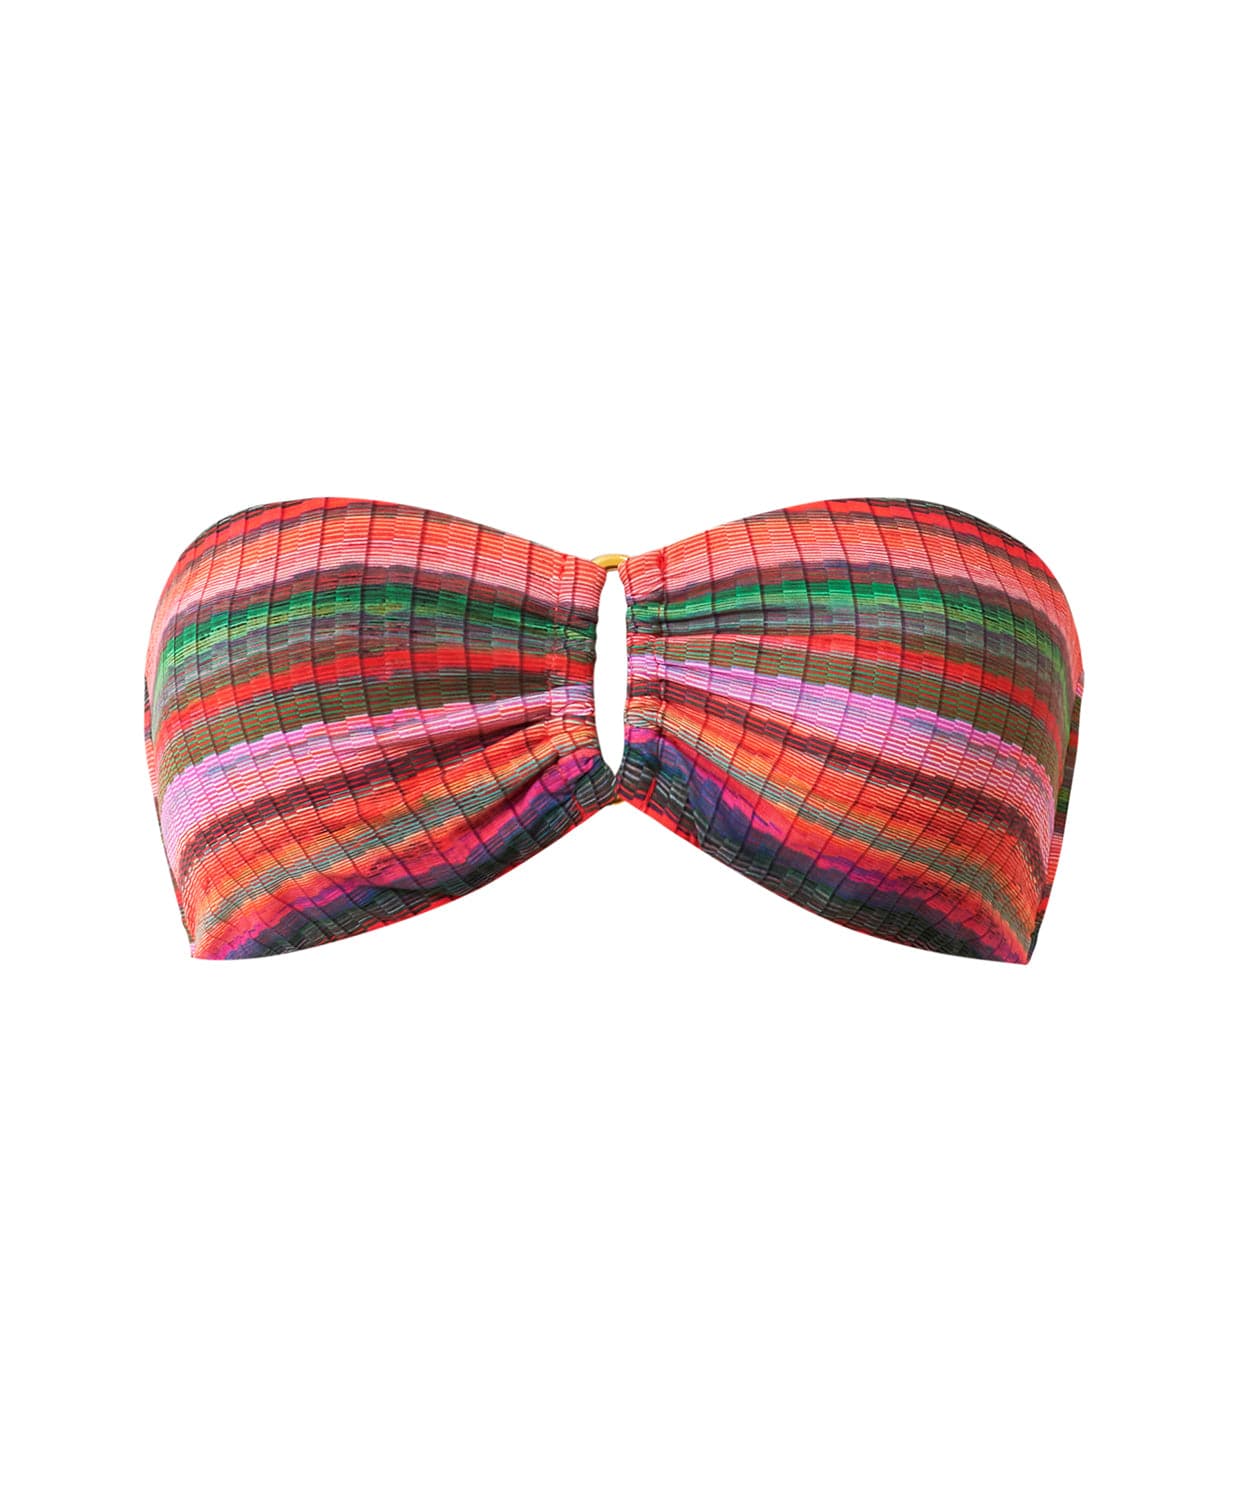 A multi-colored stripe print bandeau bikini top with gold details. Featured against a white wall background.